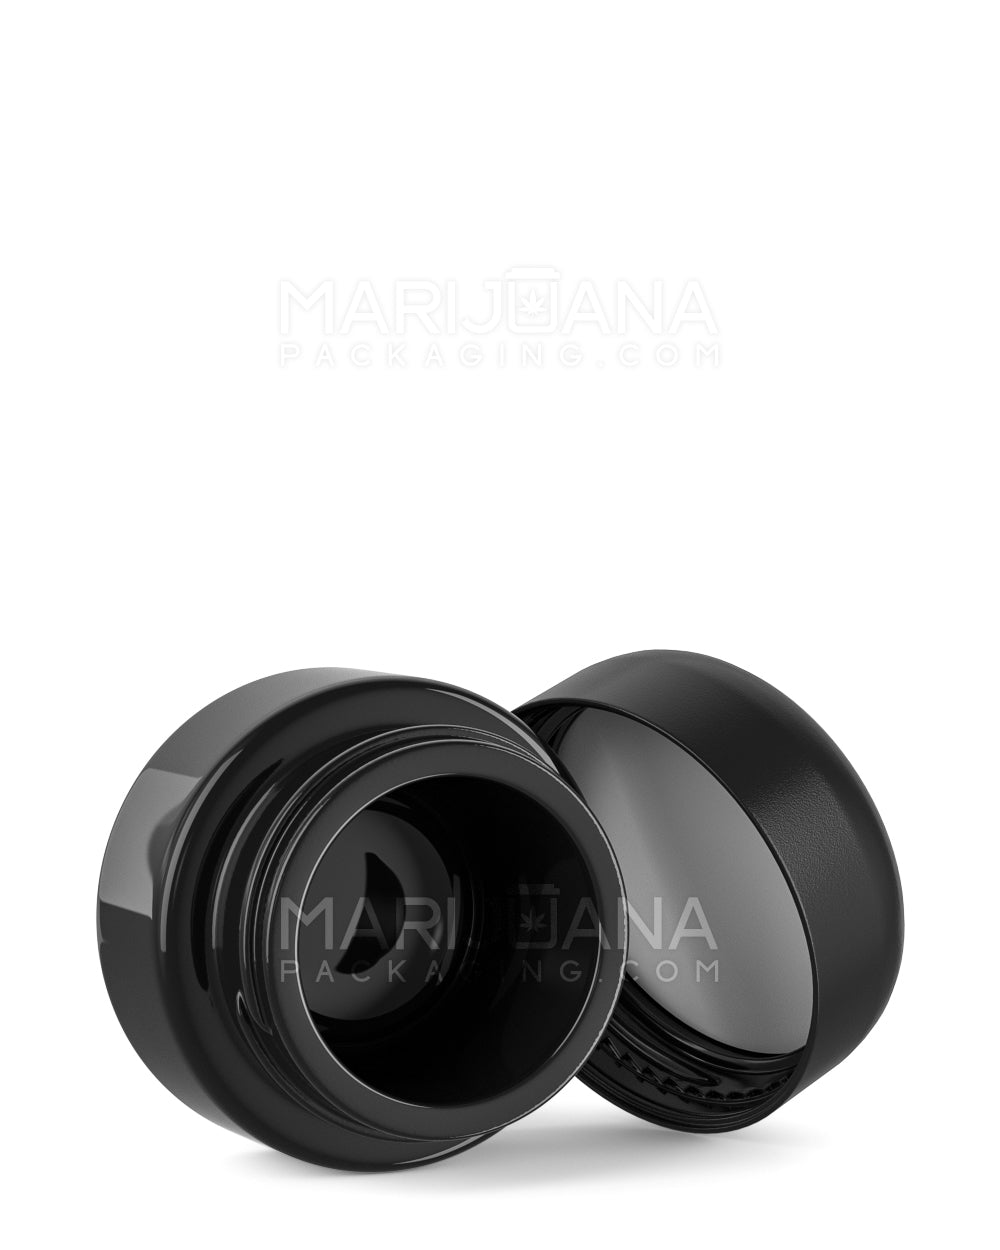 Child Resistant | Glossy Black Glass Concentrate Containers w/ Cap | 32mm - 9mL - 320 Count